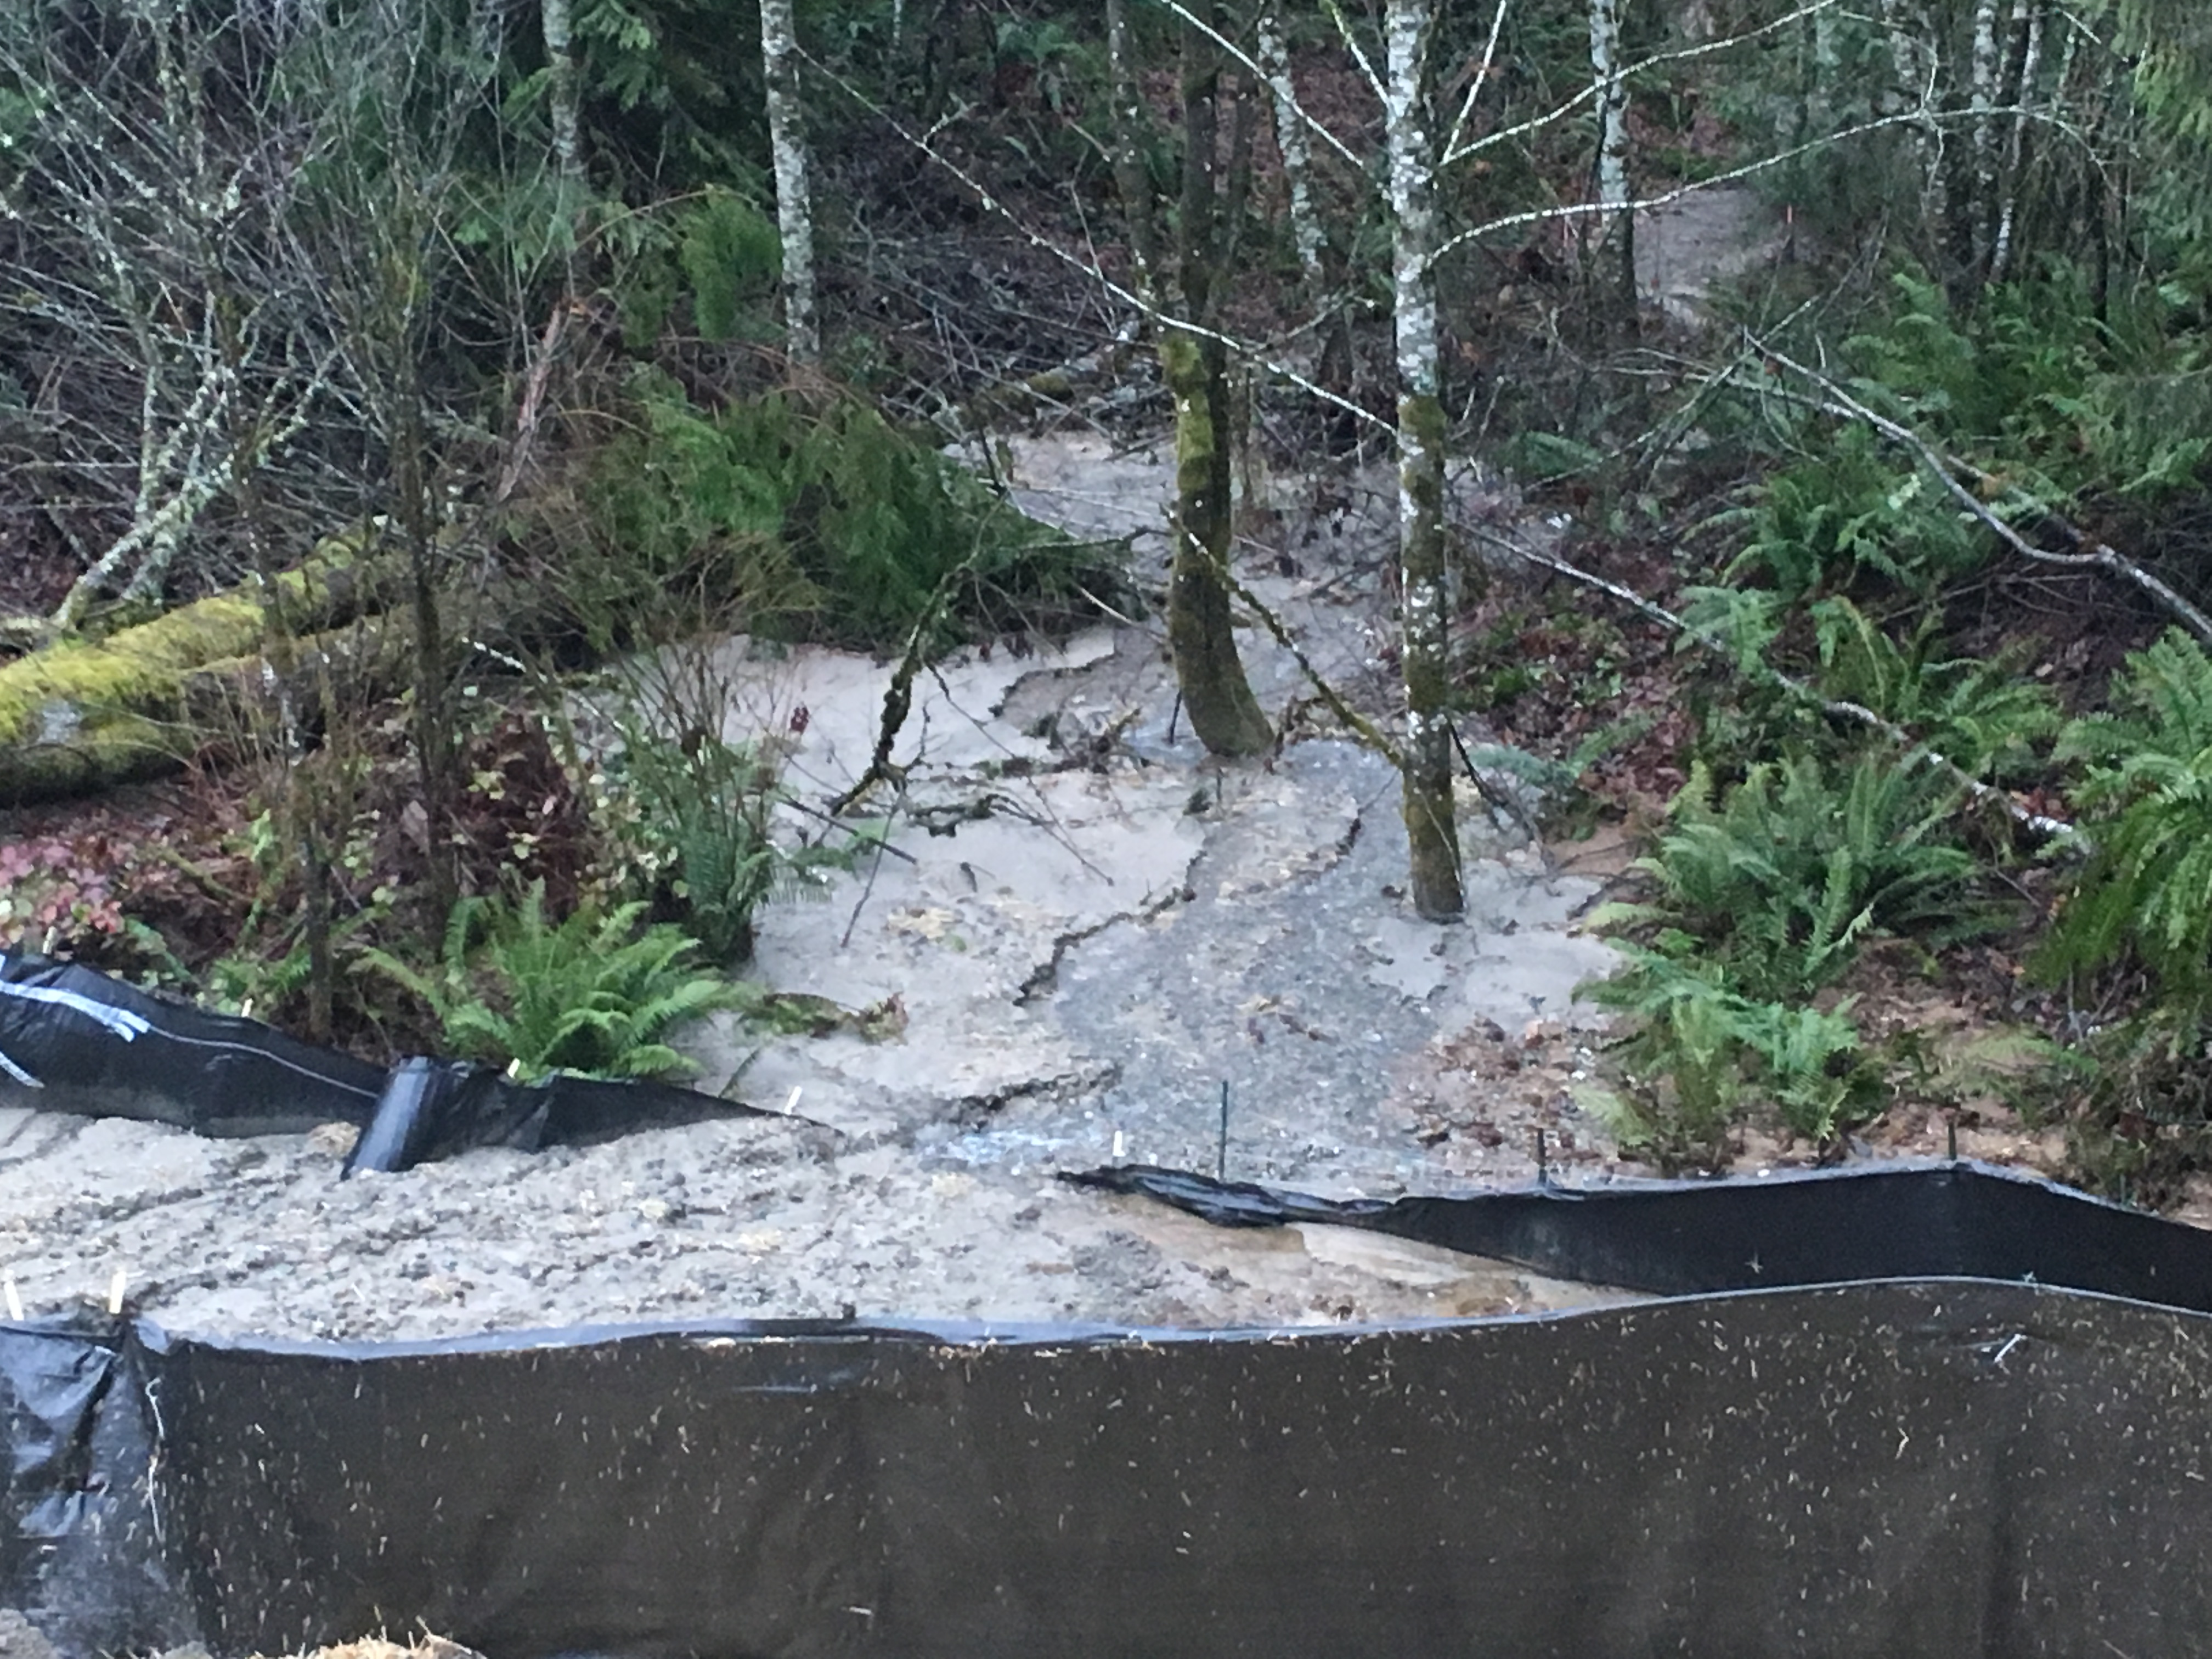 Grey mud fills a low lying portion of a forested area. It flows past plastic barriers seen in the foreground.